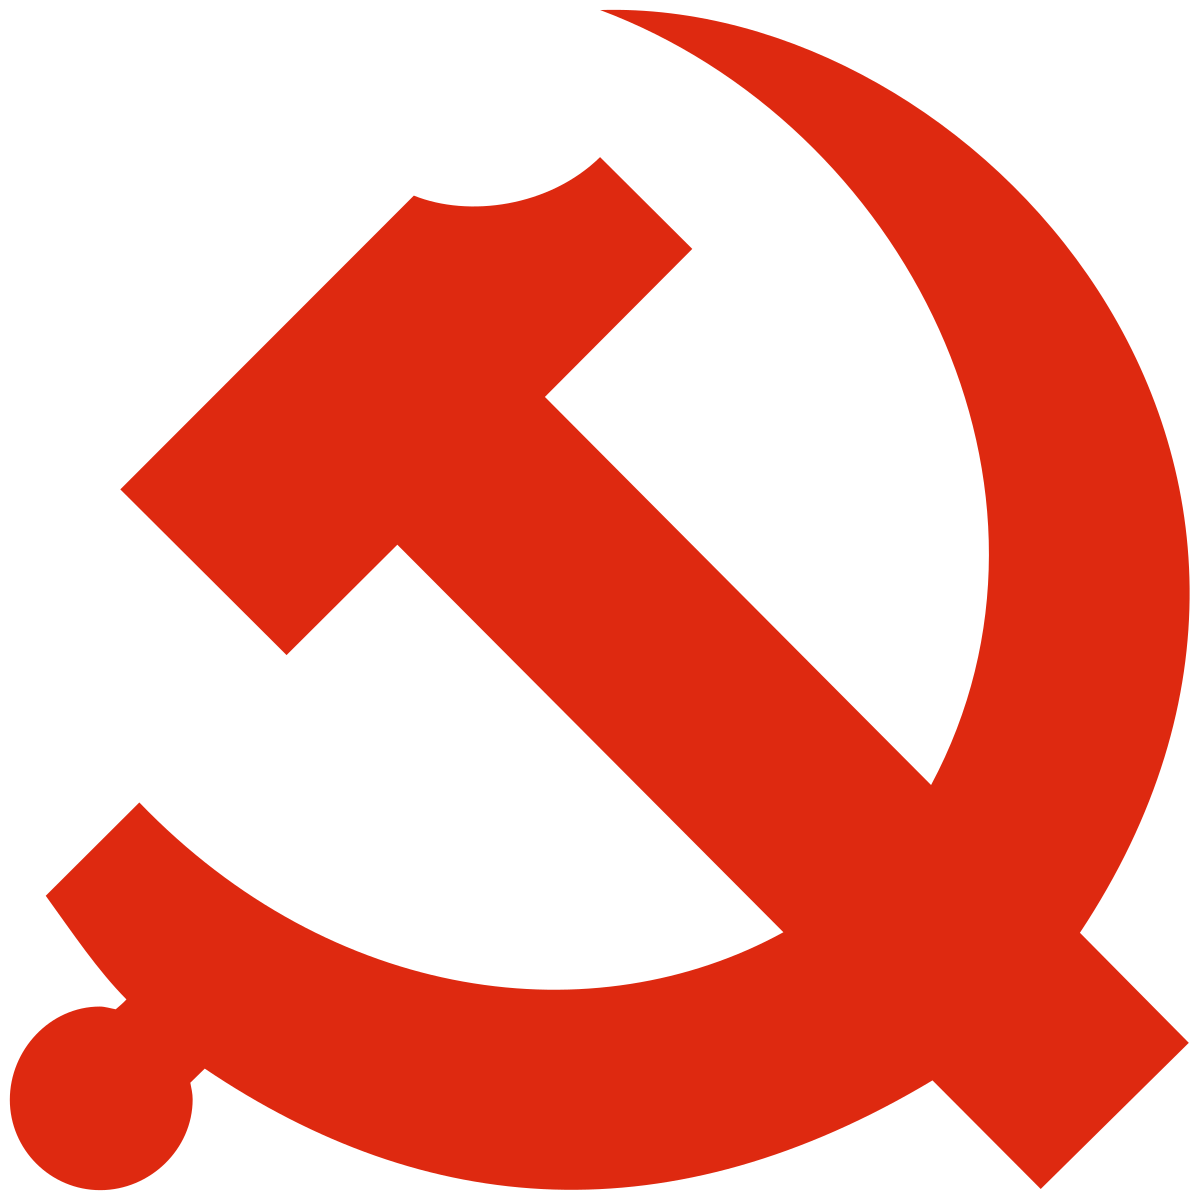 Chinese Symbol with Red Logo - Communist Party of China